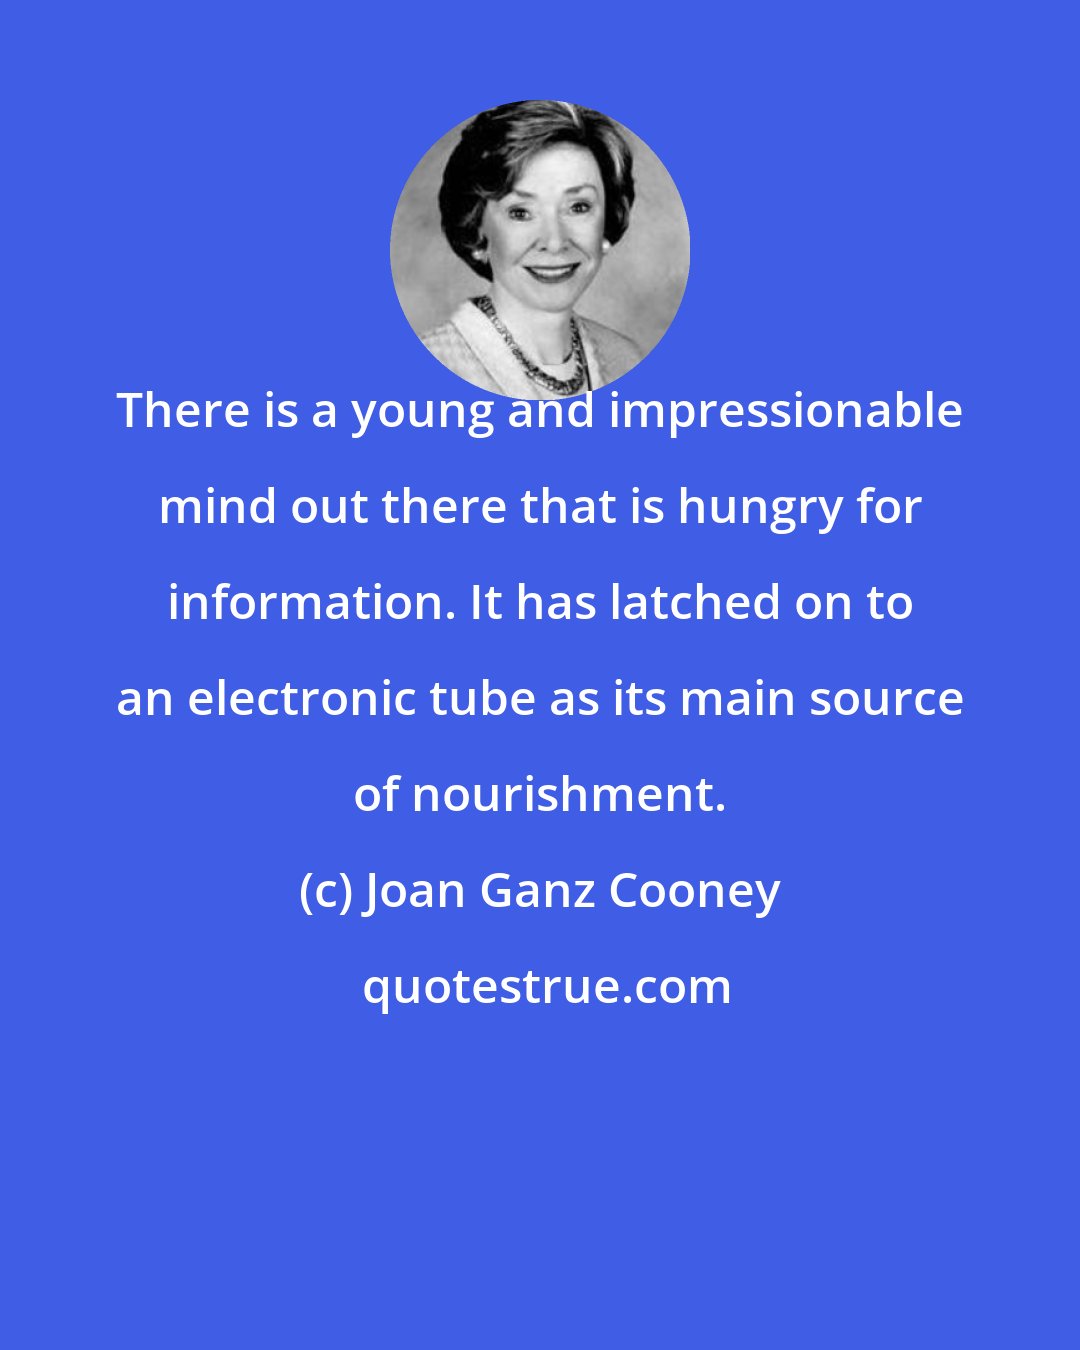 Joan Ganz Cooney: There is a young and impressionable mind out there that is hungry for information. It has latched on to an electronic tube as its main source of nourishment.